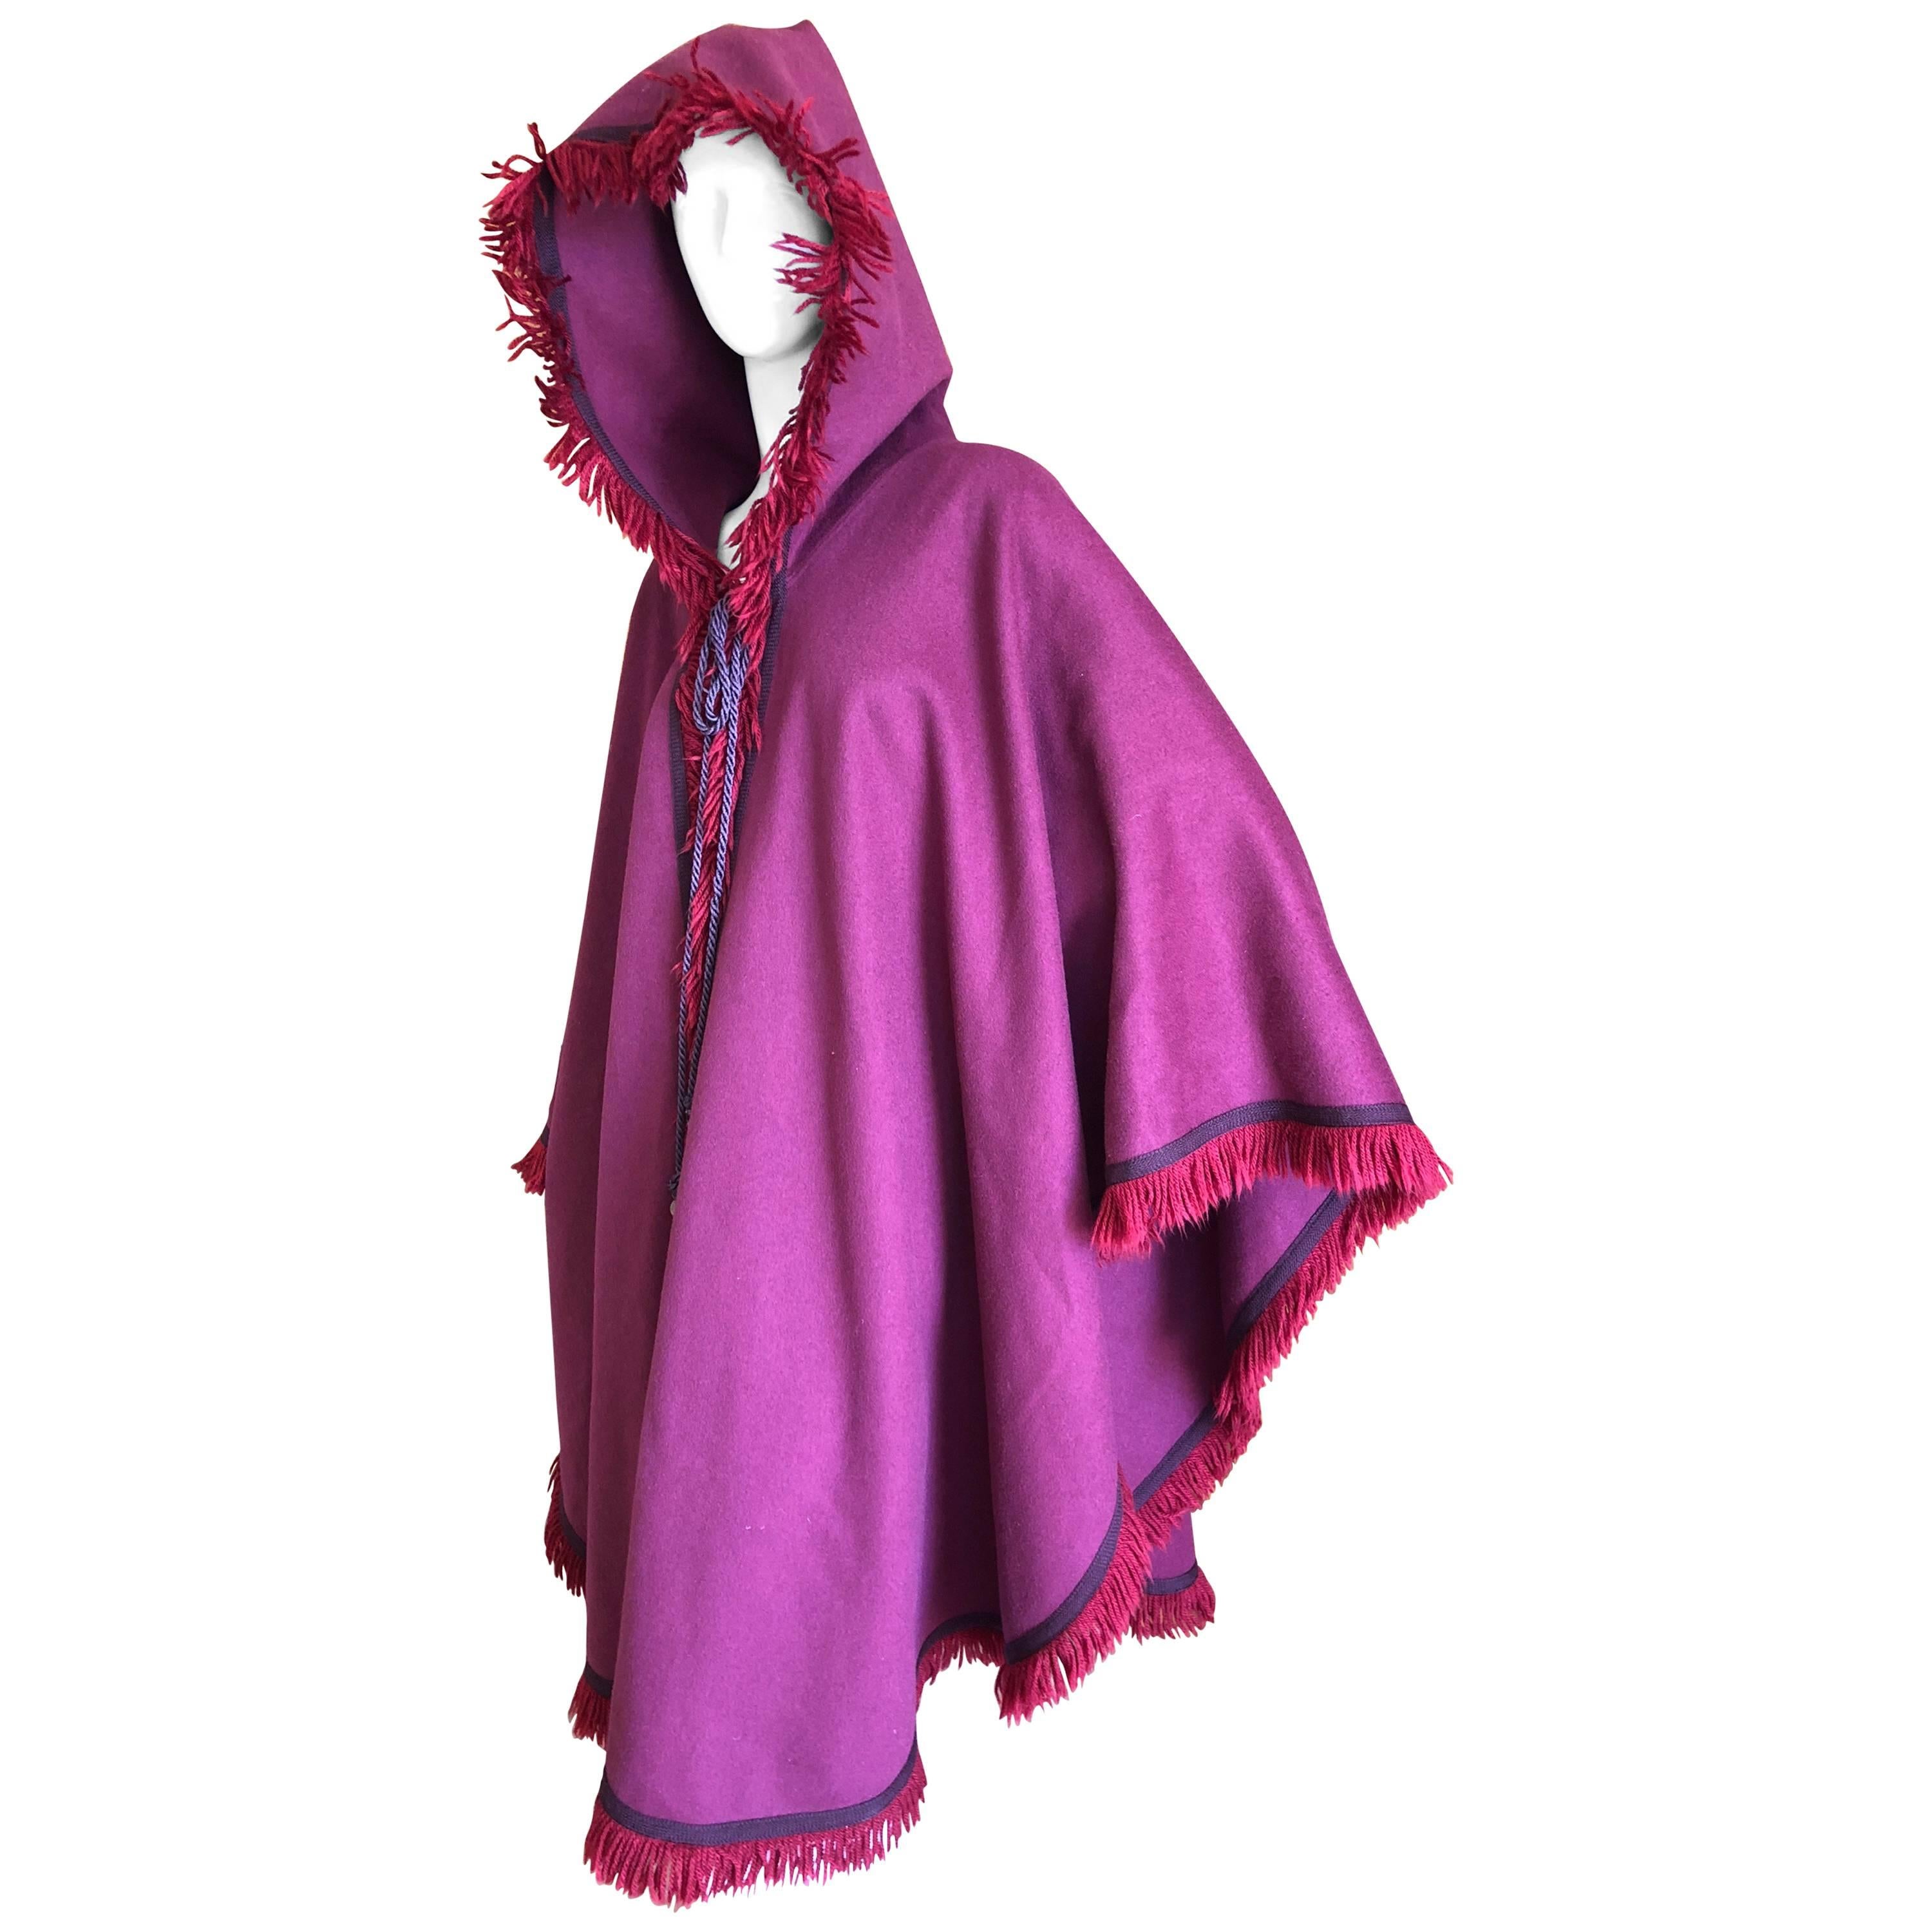 Yves Saint Laurent Rive Gauche Fringed Fuchsia Cape with Hood and Tassel For Sale